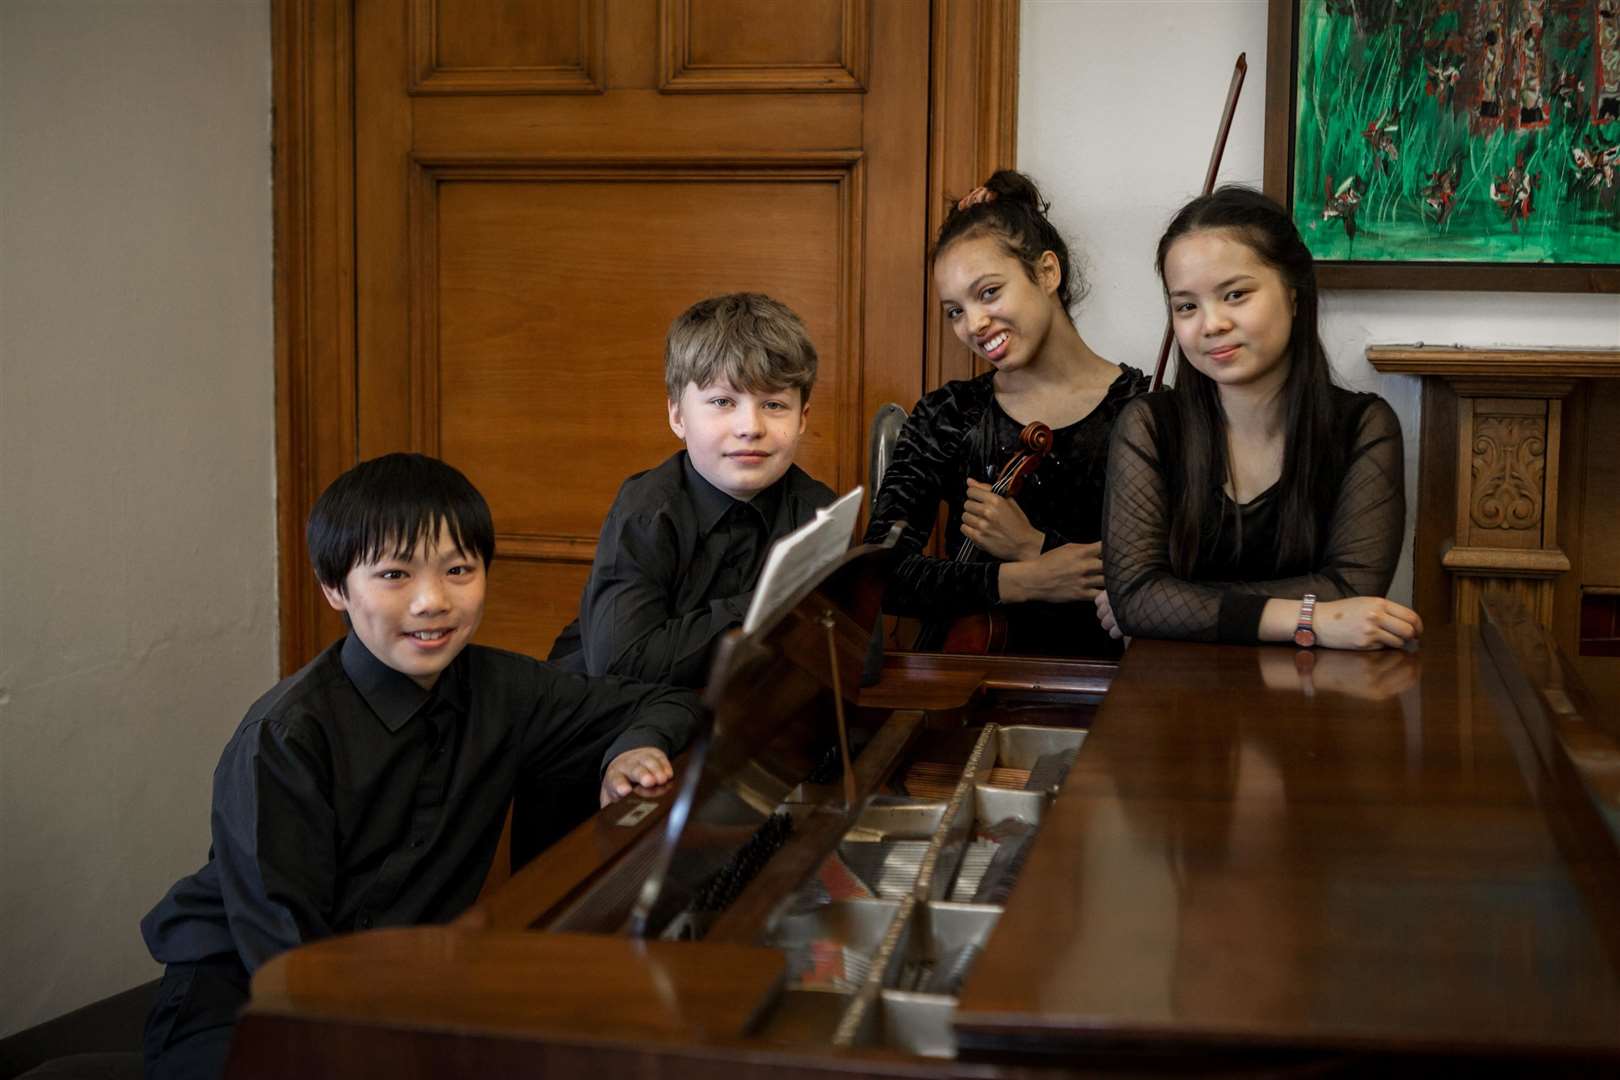 St Mary's Music School, Scotland's national music school, welcomes talented young musicians from Scotland.